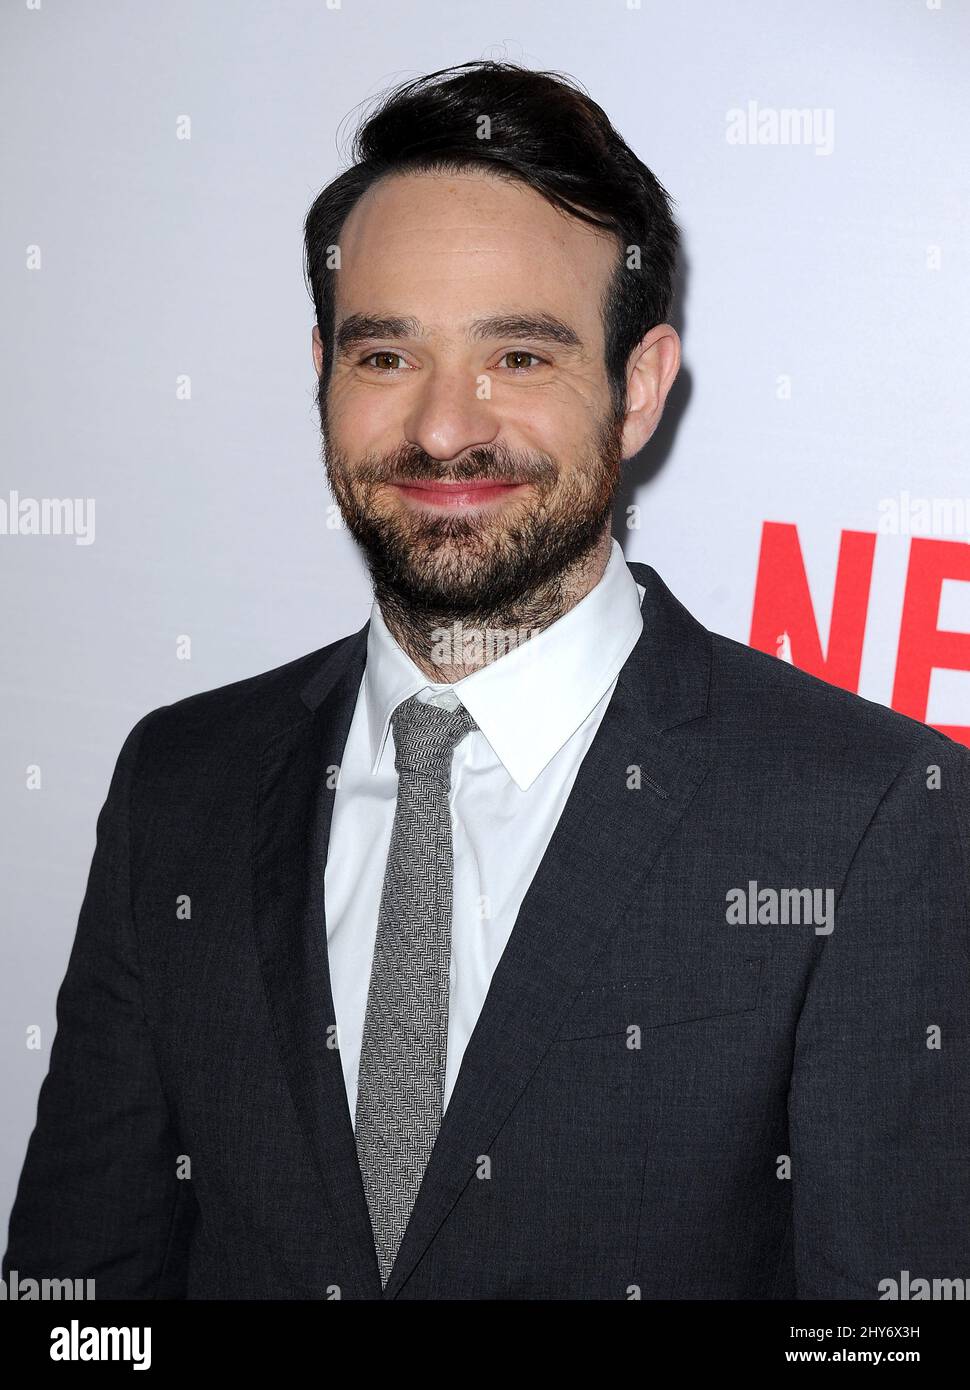 Charlie Cox attending the 'Daredevil' premiere in Los Angeles Stock Photo